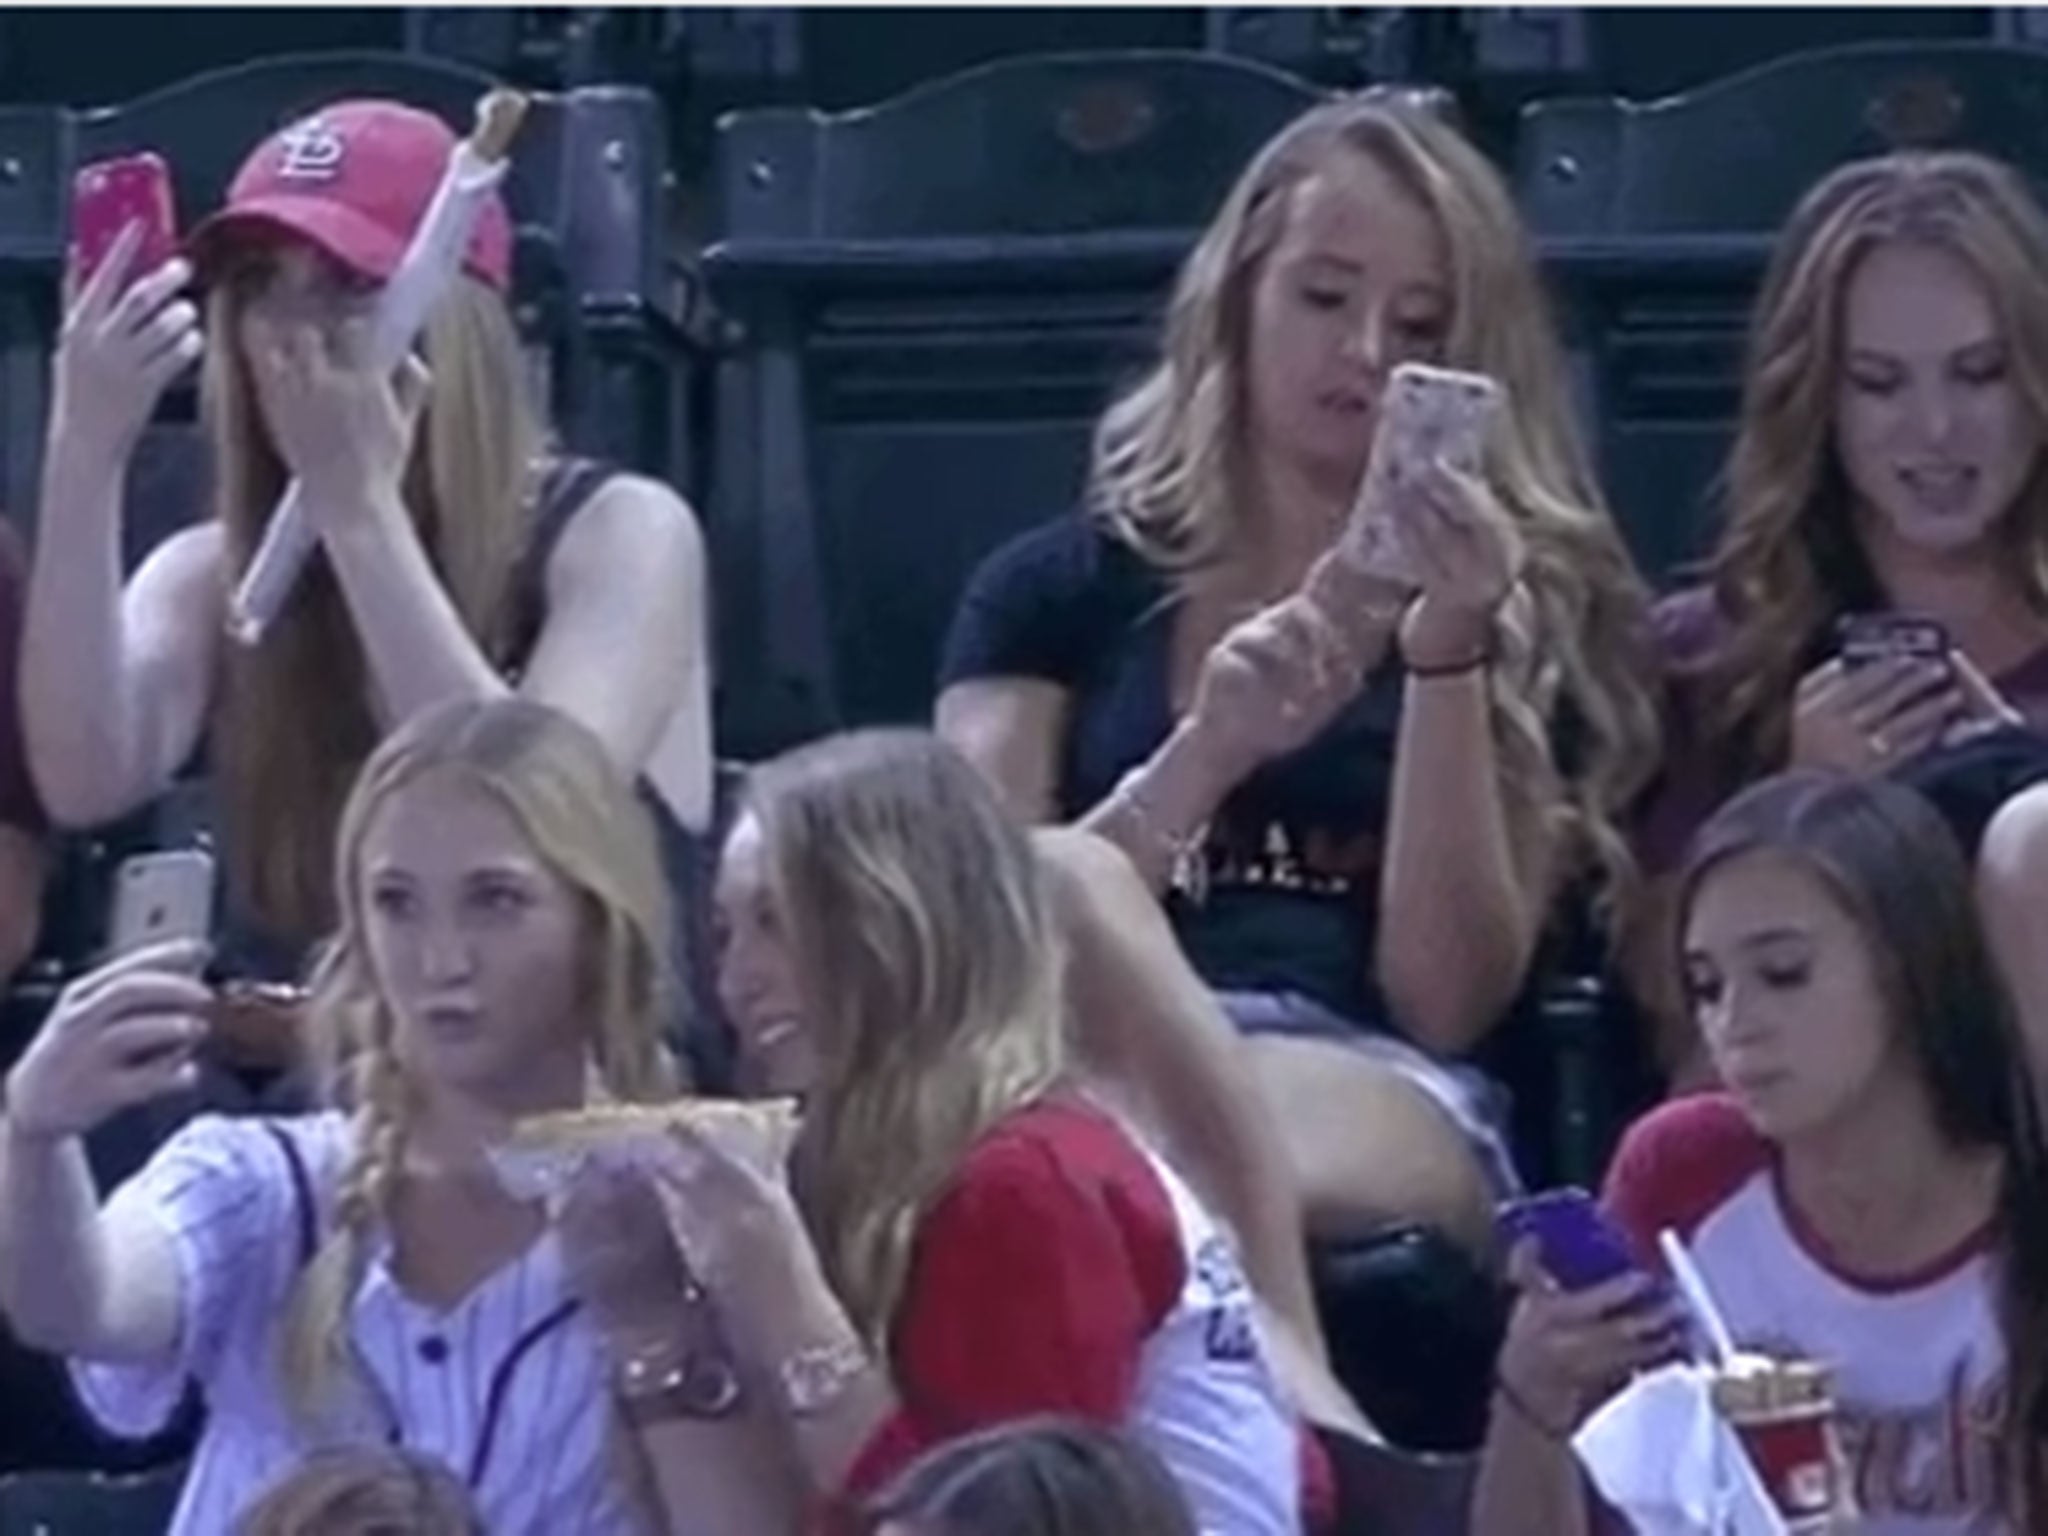 The girls were mocked for taking selfies at a baseball game